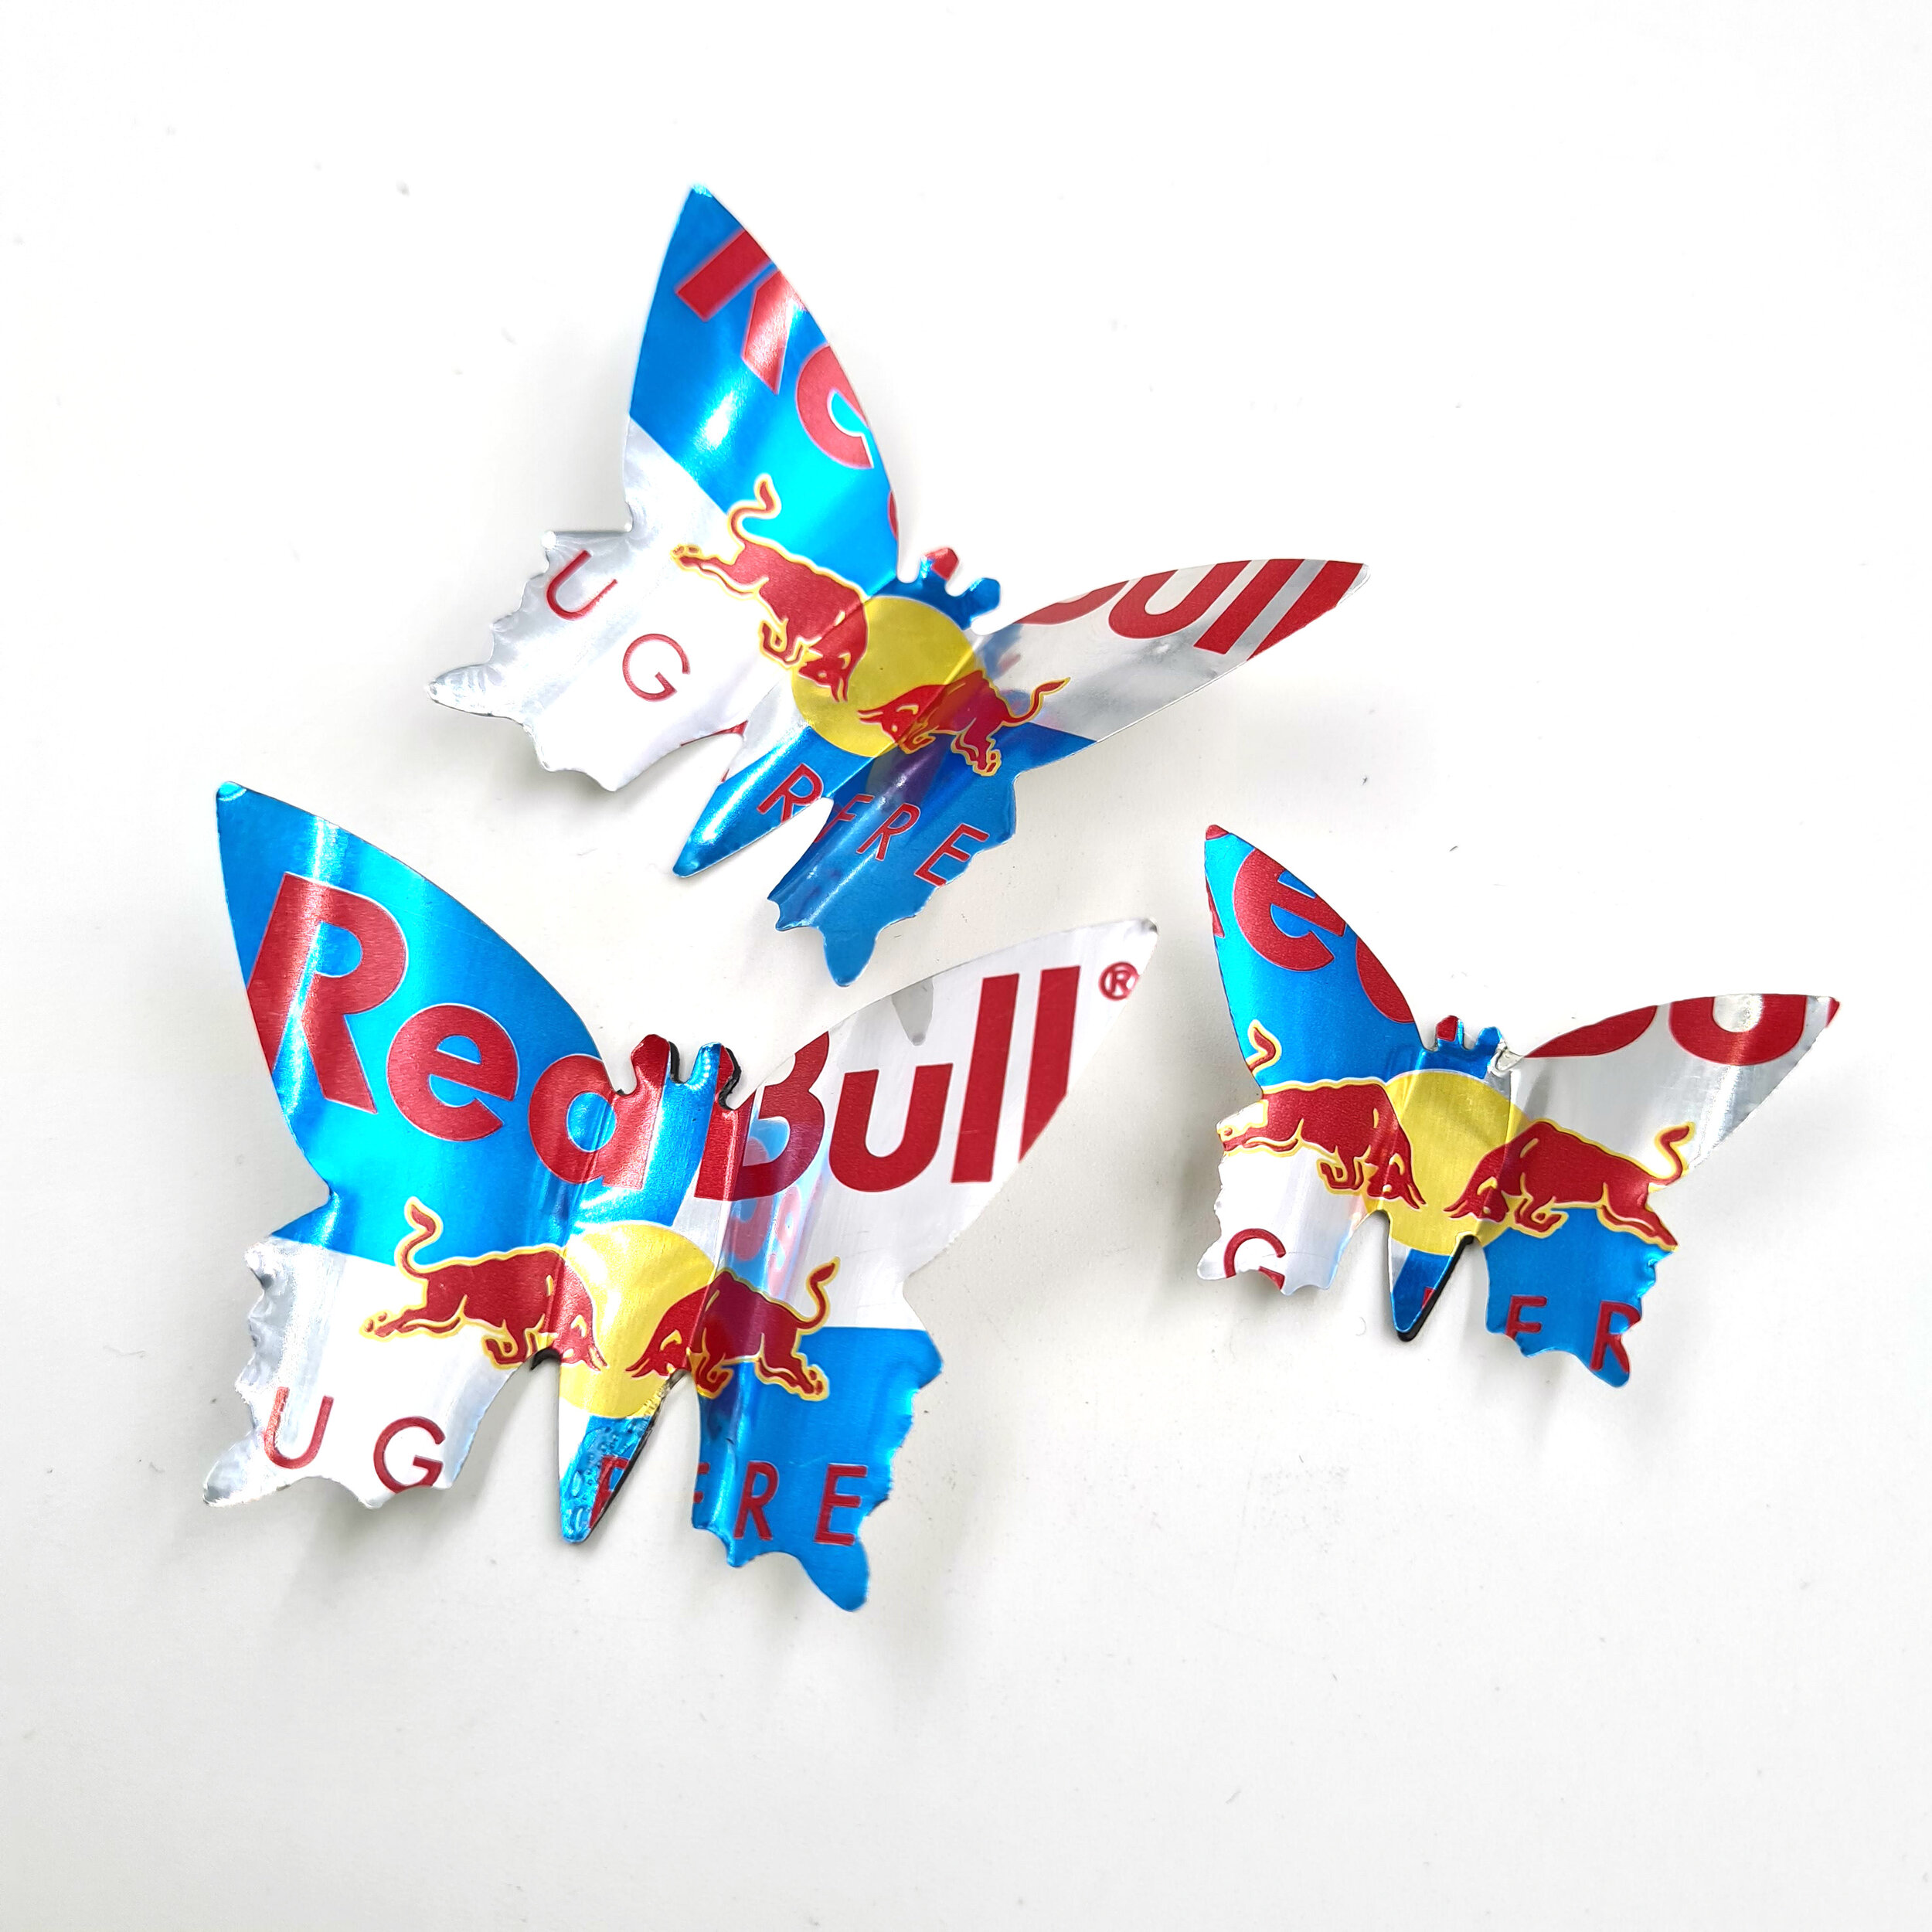 Red Creative sustainable Red Bull Sugar Free Butterfly Can Magnets